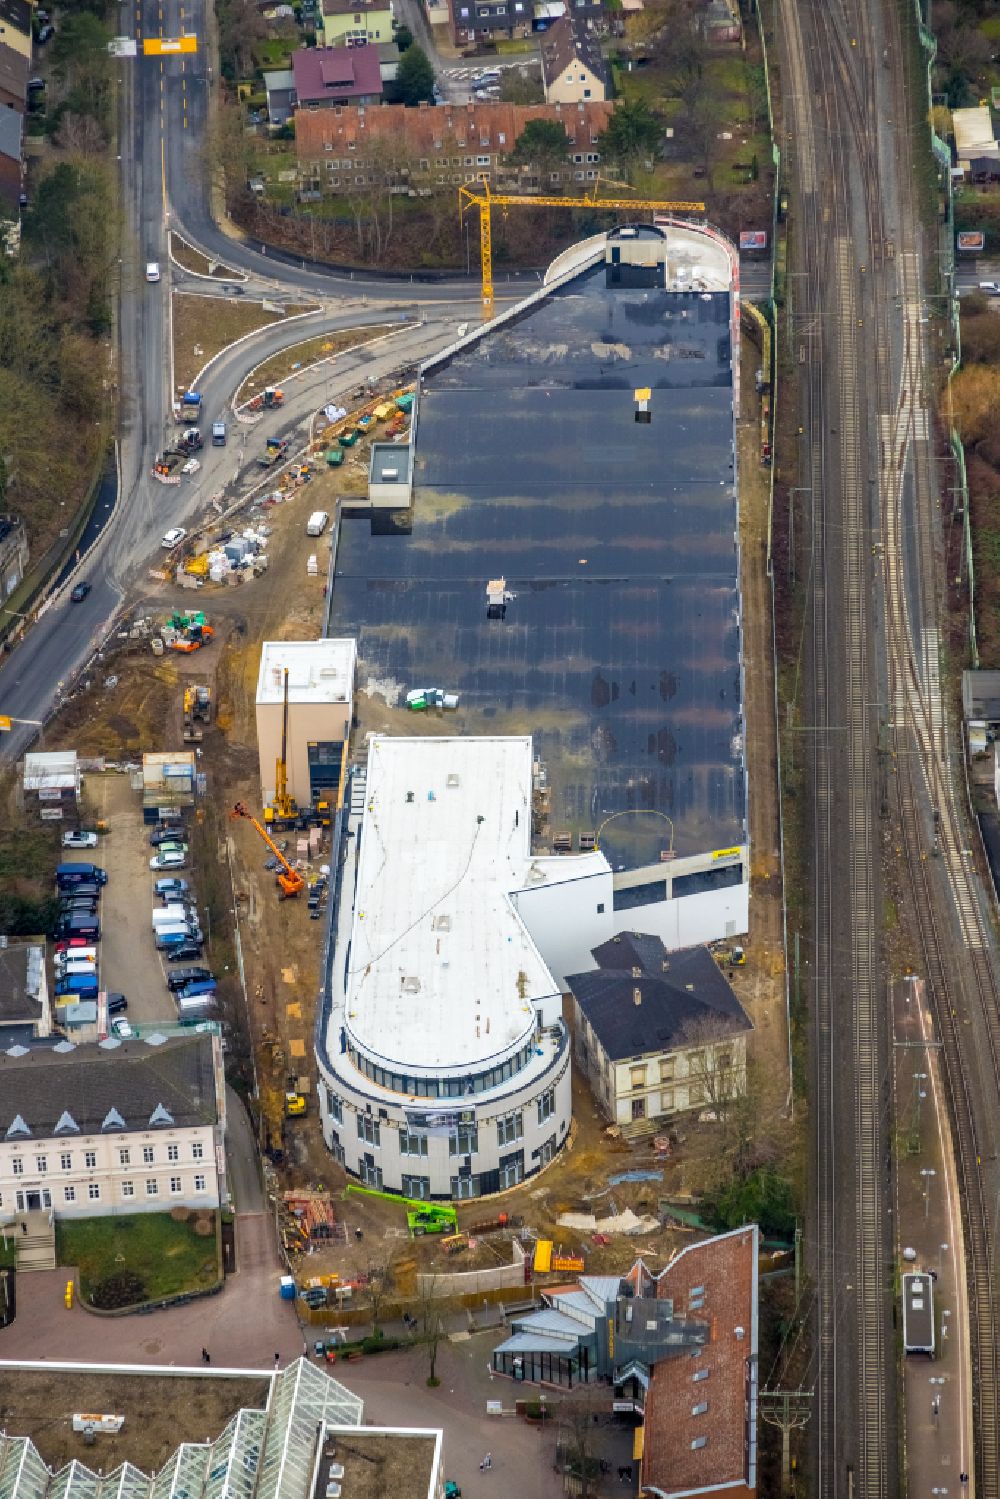 Unna from above - New construction of the building complex of the shopping center on Bahnhofstrasse - Kantstrasse in the district Alte Heide in Unna at Ruhrgebiet in the state North Rhine-Westphalia, Germany